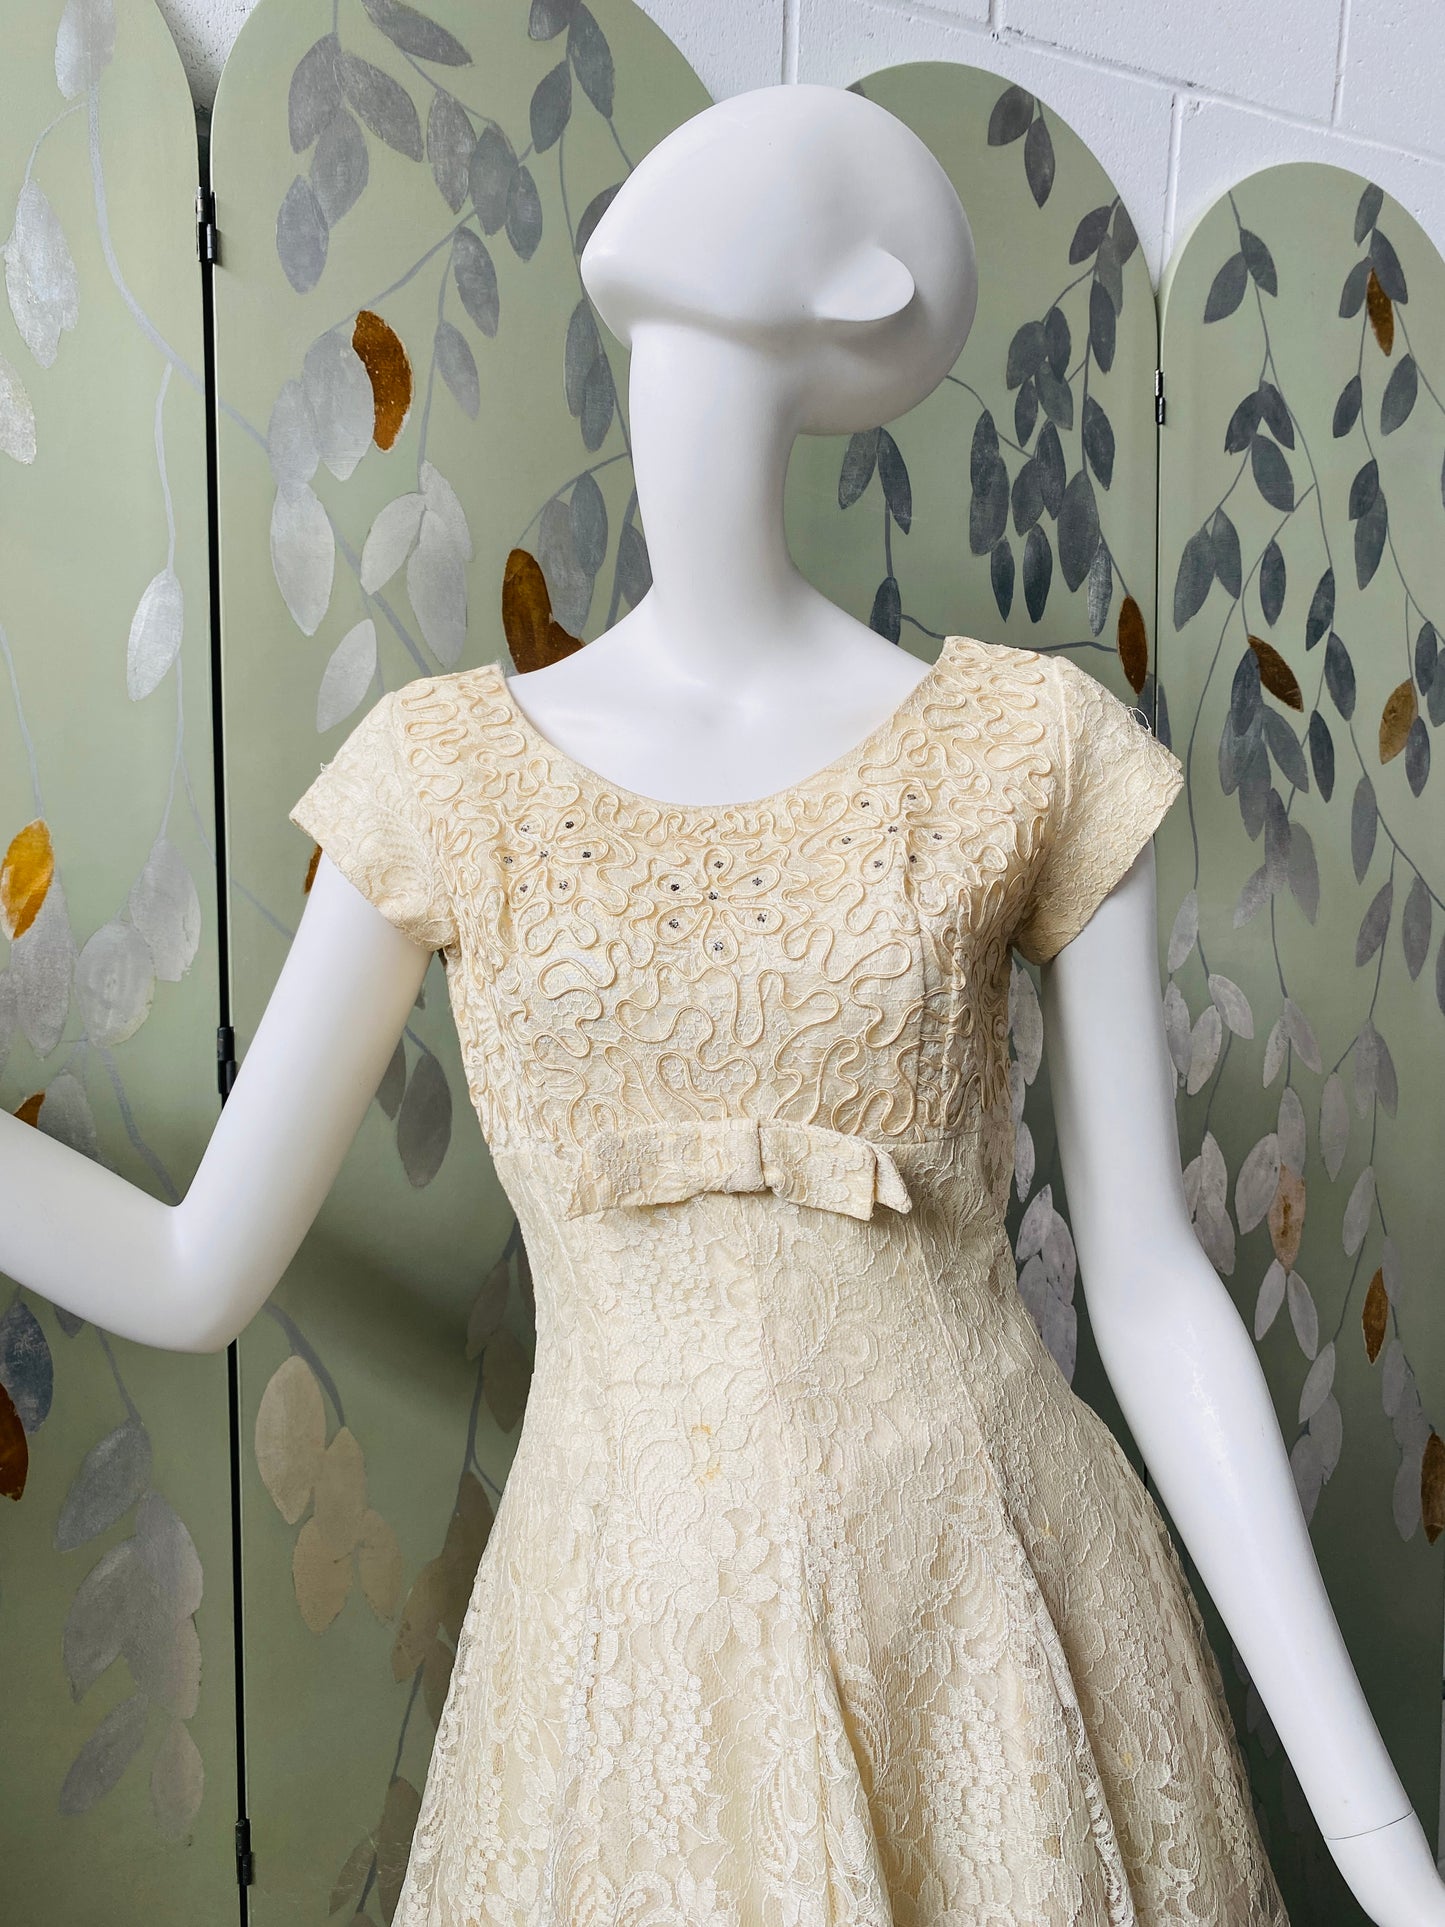 Vintage 1950s Cream Lace Cocktail Dress with Embellished Bodice, B34"